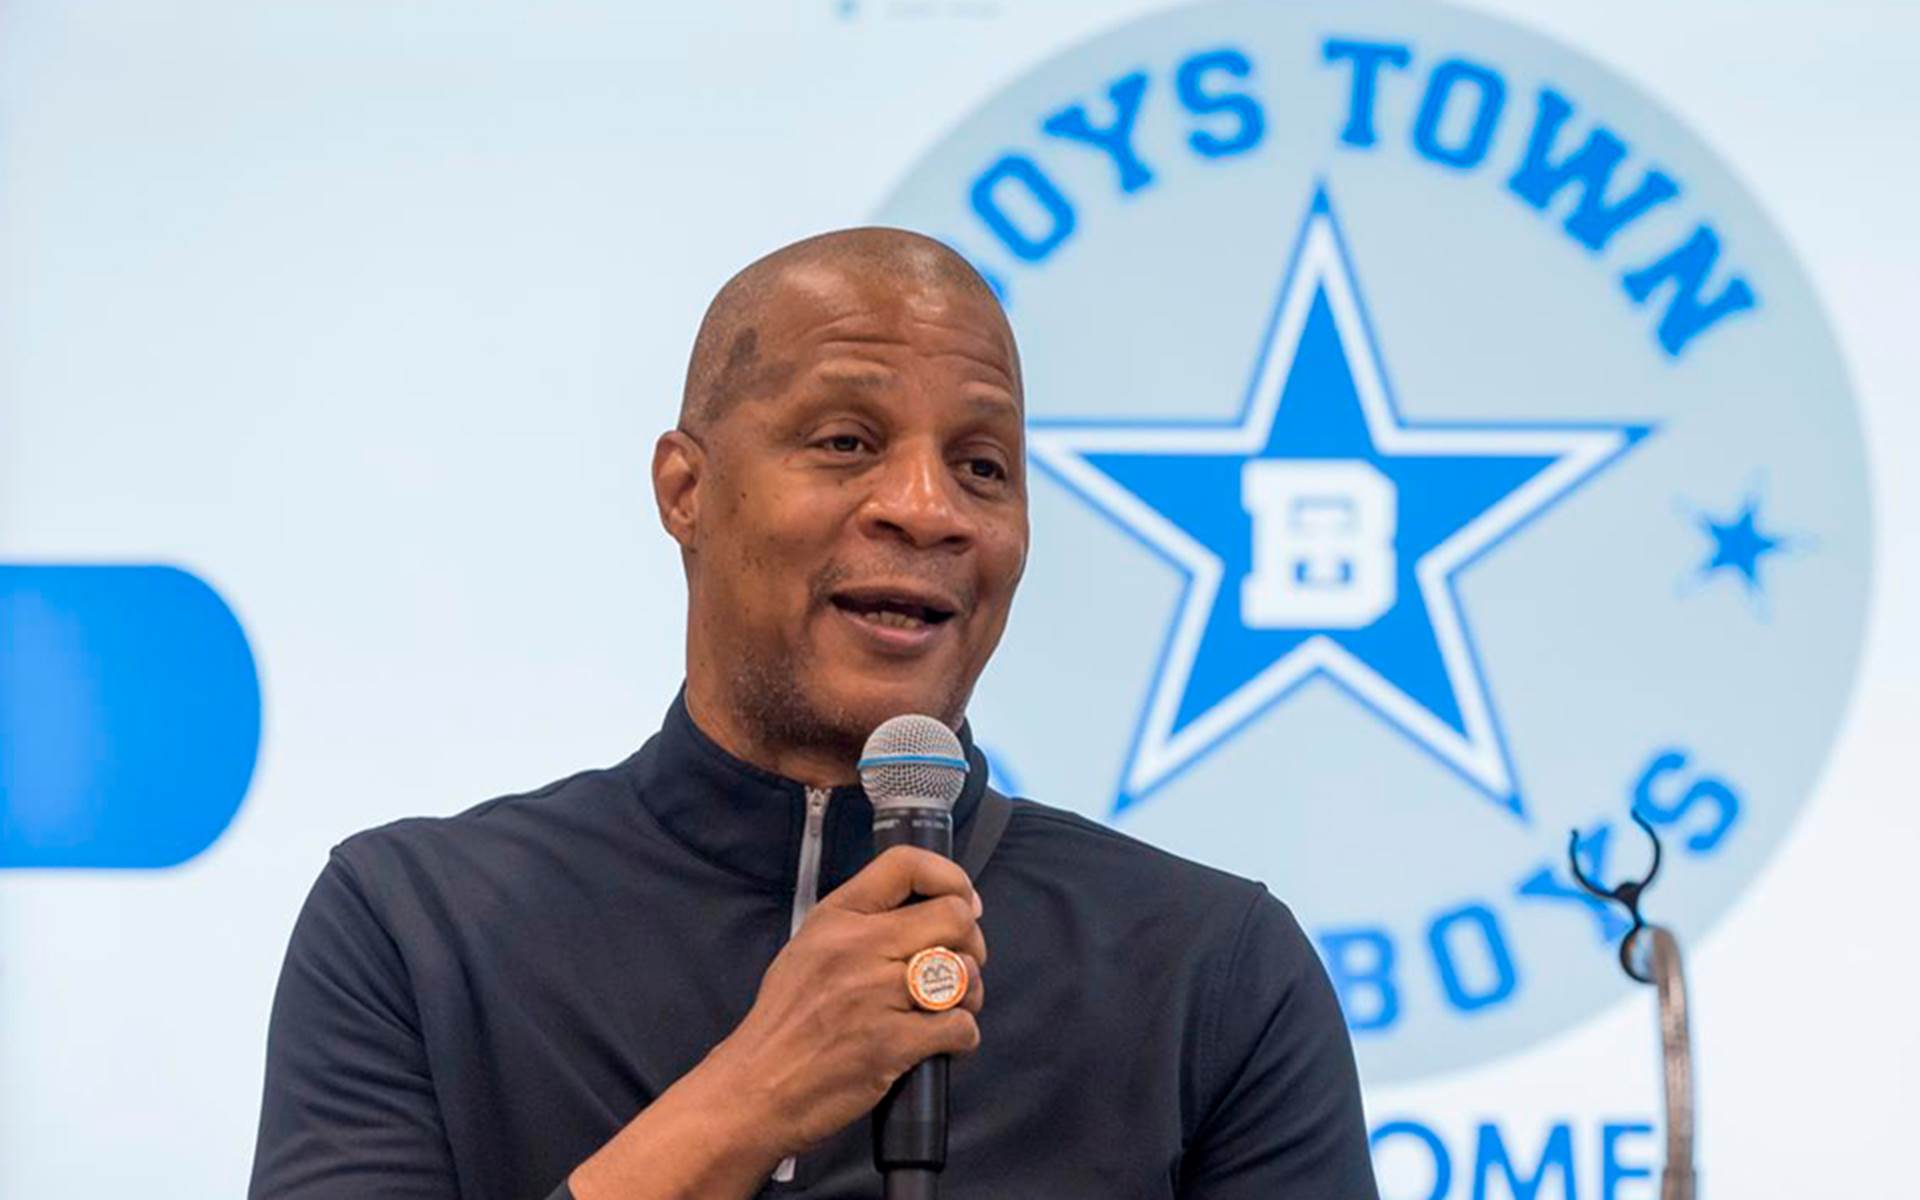 Former MLB Star Darryl Strawberry Shares Message of Hope and Overcoming Struggle at Boys Town